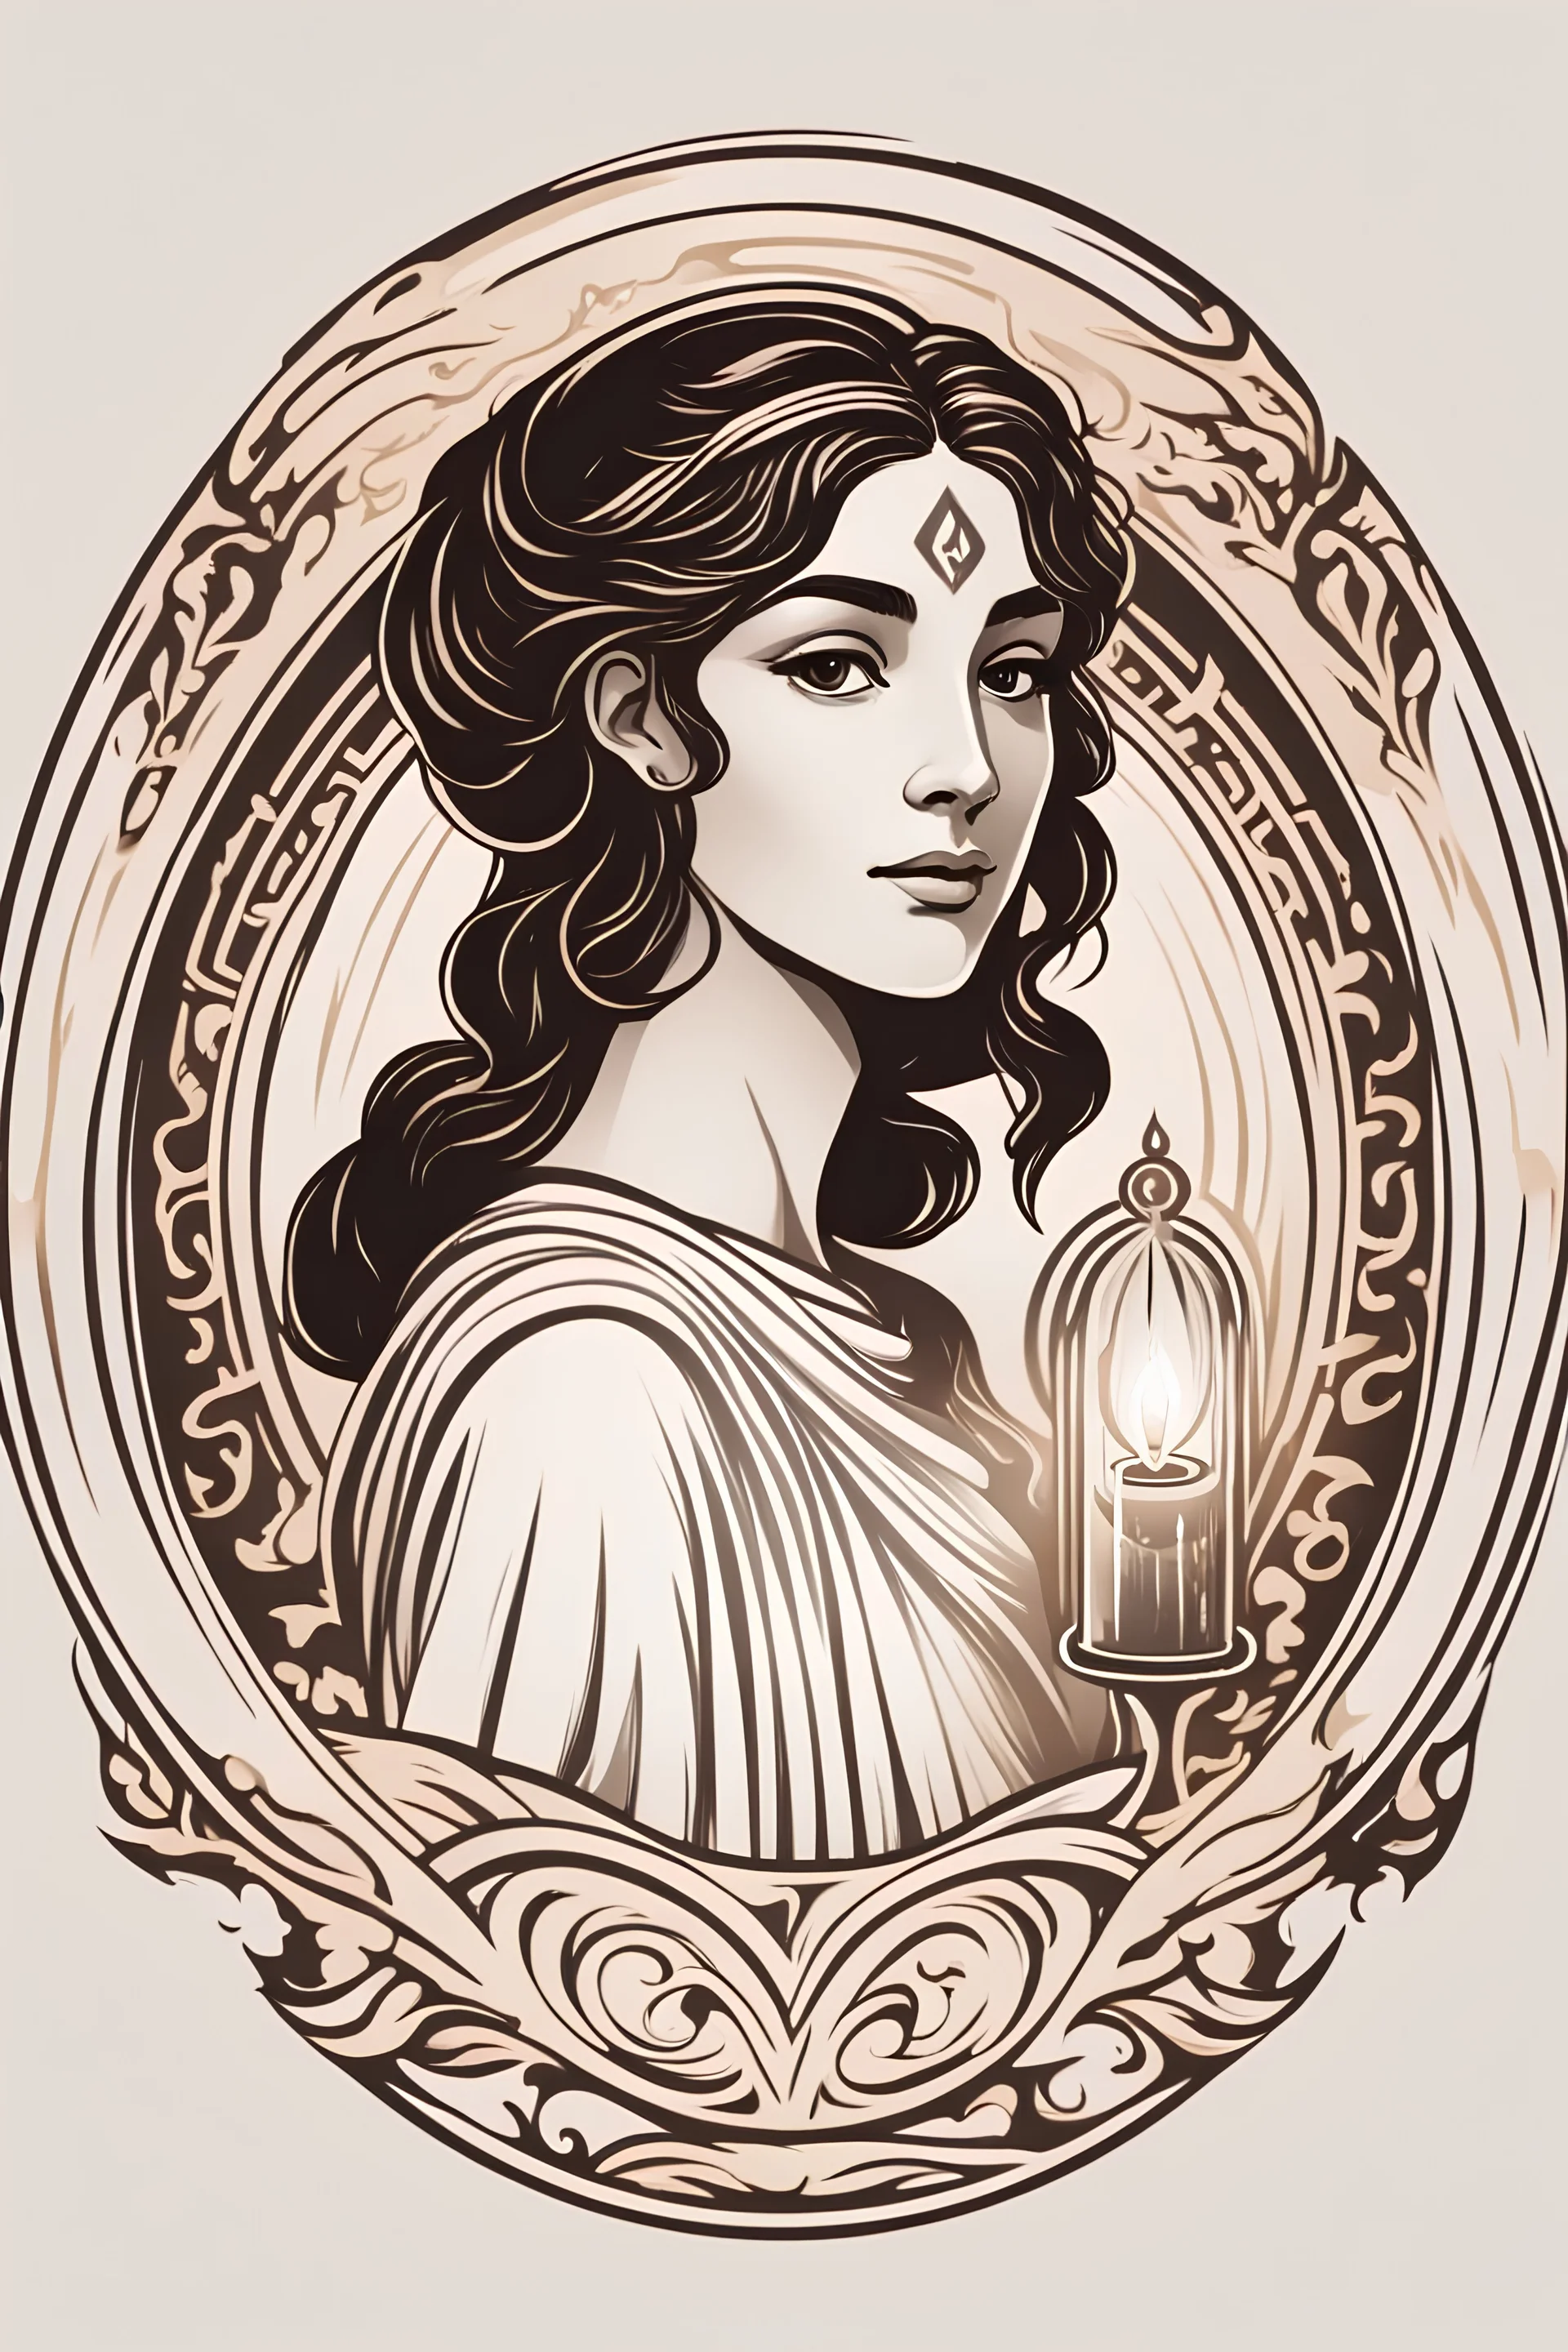 The logo design entails a circular frame, symbolizing unity and continuity. Within this frame, a girl with prominent Greek features is depicted. She exemplifies grace and elegance, conveying a sense of timeless beauty. The girl is positioned in the center, holding a burning candle, which represents enlightenment, knowledge, and the power of intelligence. The flame of the candle shines brightly, signifying the illuminating capabilities of artificial intelligence. The girl's facial expression is c